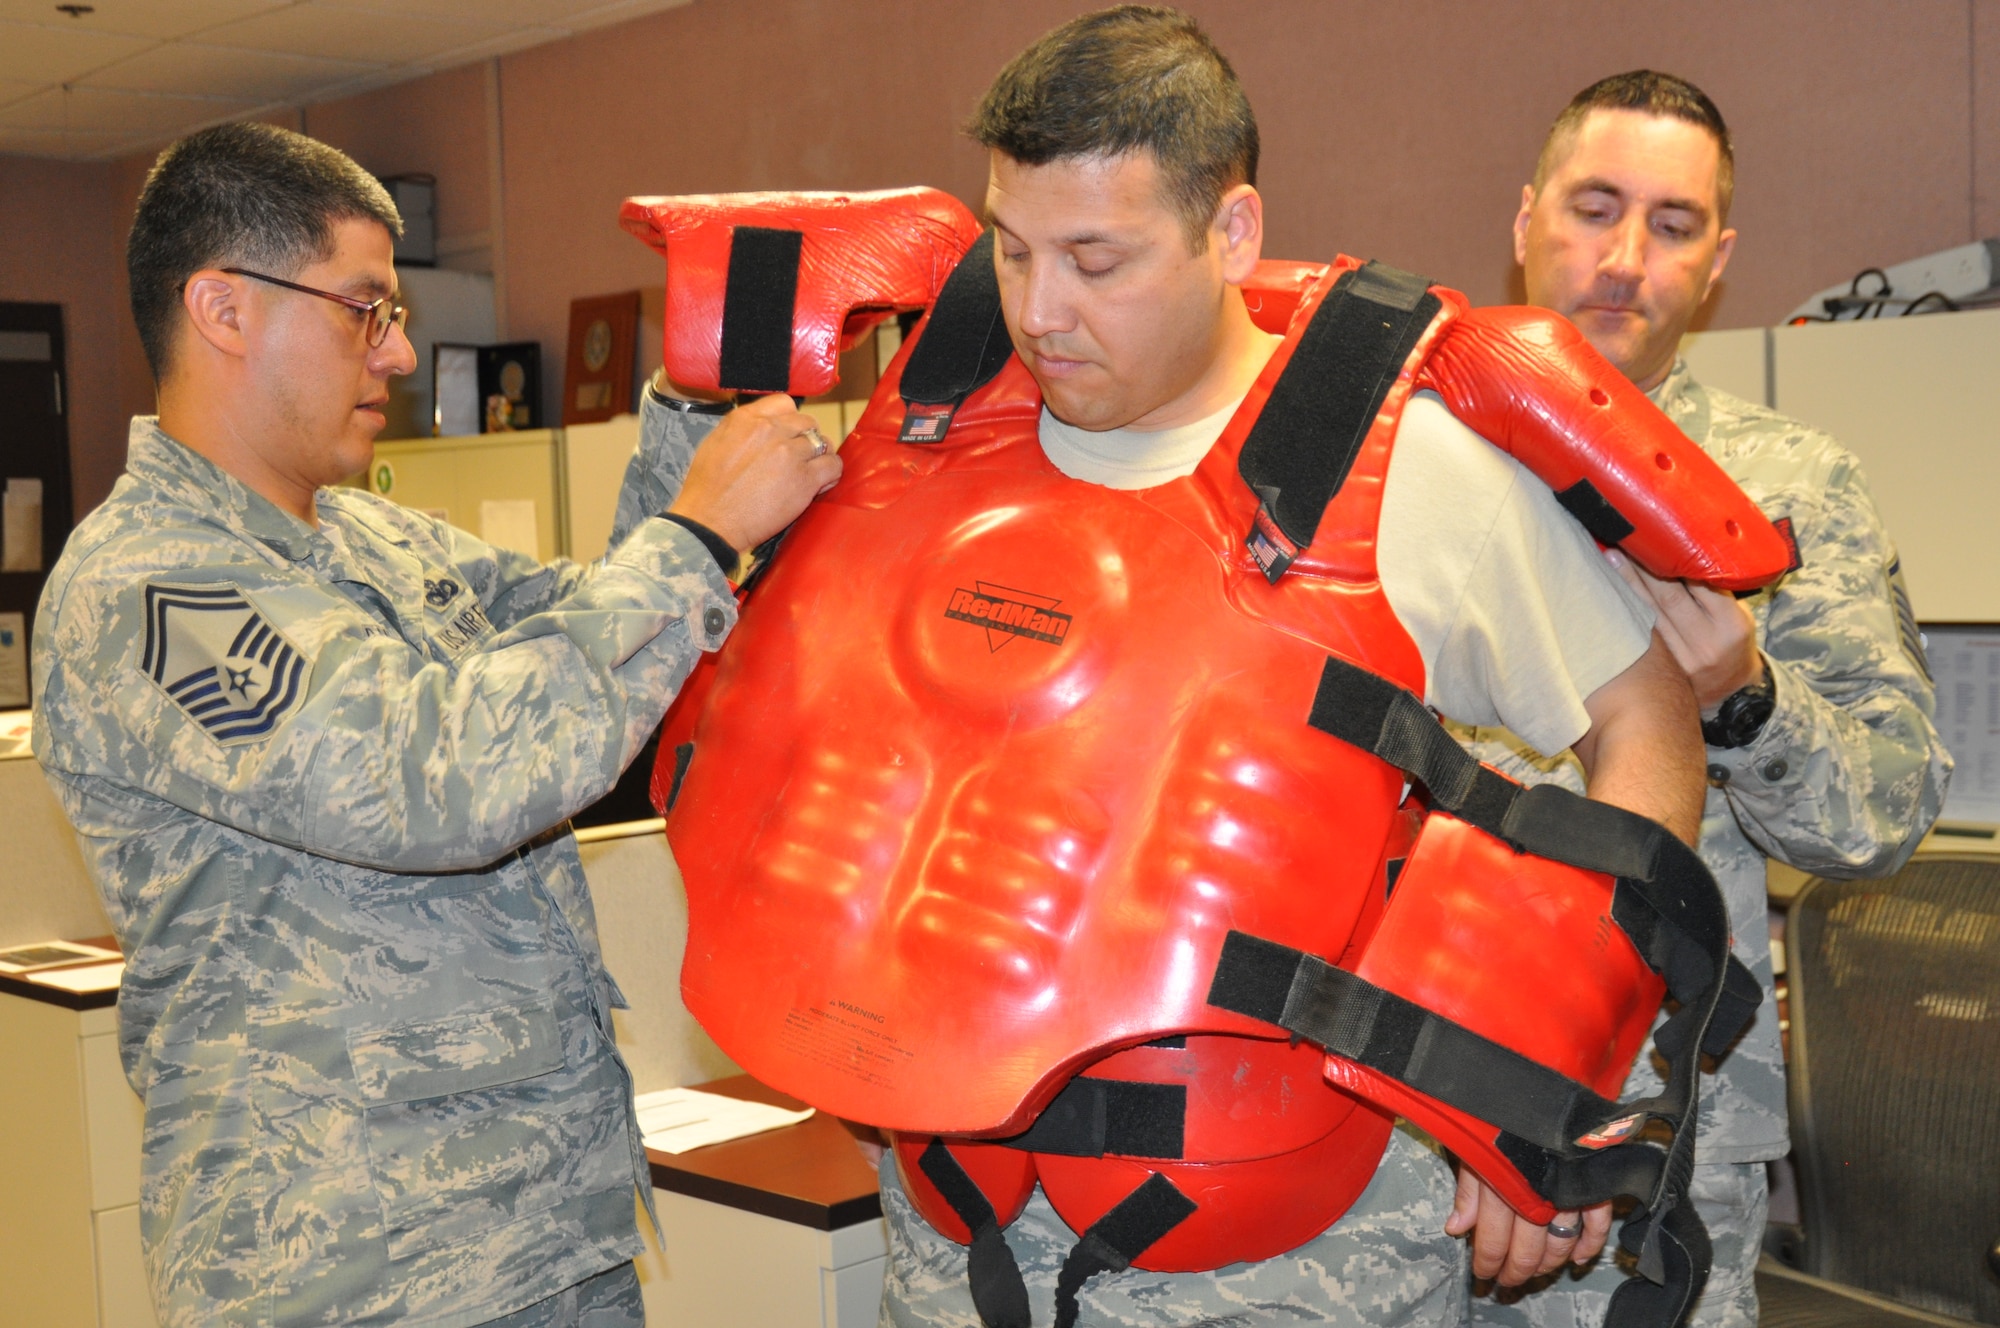 Senior Master Sgt. Benjamin Miranda and Master Sgt. Robert Danylchuk, 12th Air Force (Air Forces Southern) Force Protection, assist Master Sgt. Paul Azevedo, 12th AF (AFSOUTH) A4/7, in putting on the “red-man” suit in preparation for an organizational active-shooter exercise at Davis-Monthan AFB, Ariz., April 4. (USAF photo by Master Sgt. Kelly Ogden/Released). 